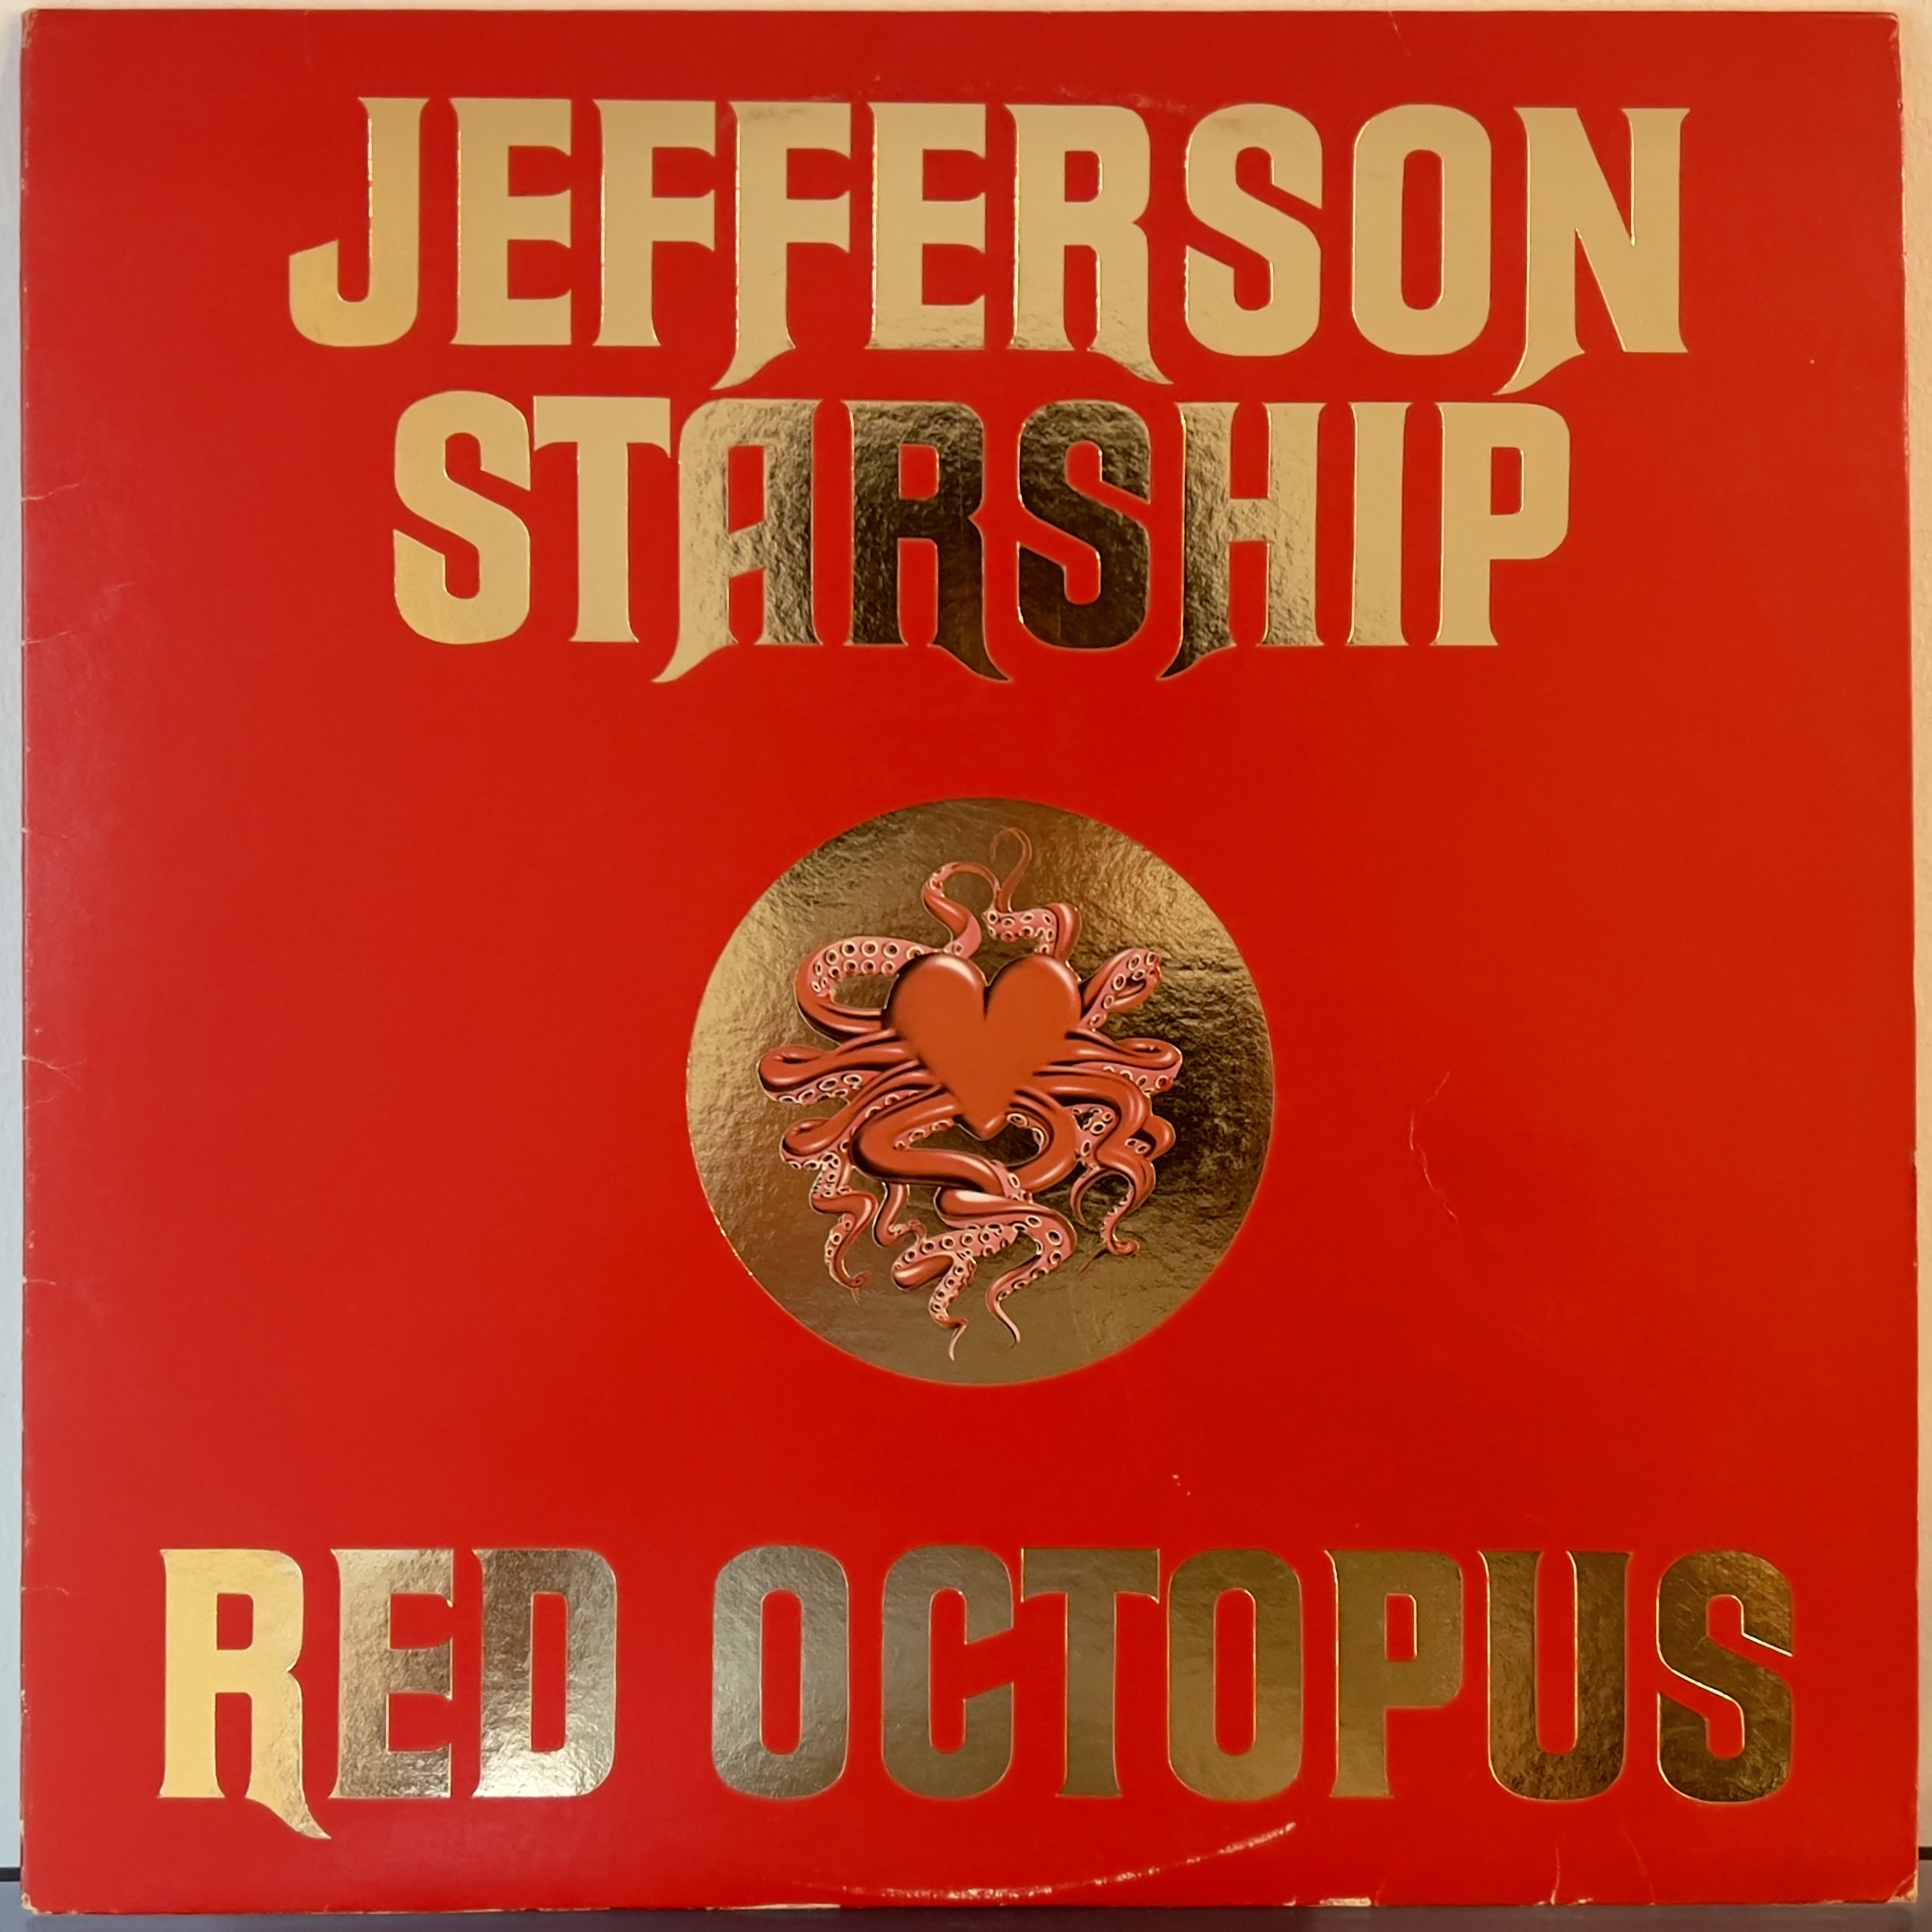 Red Octopus by Jefferson Starship